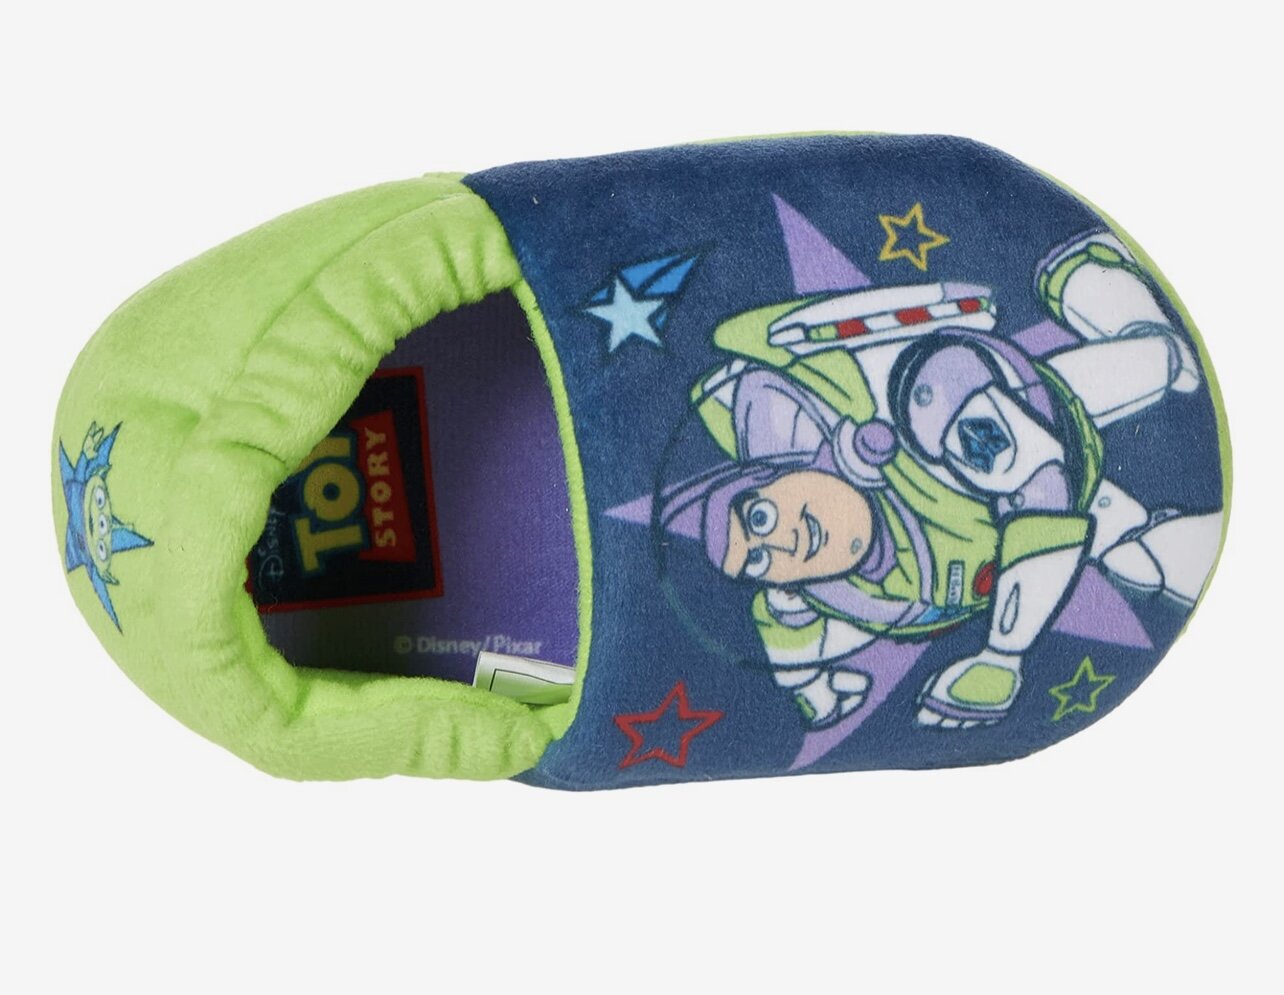 Toy Story Slippers/Josmo